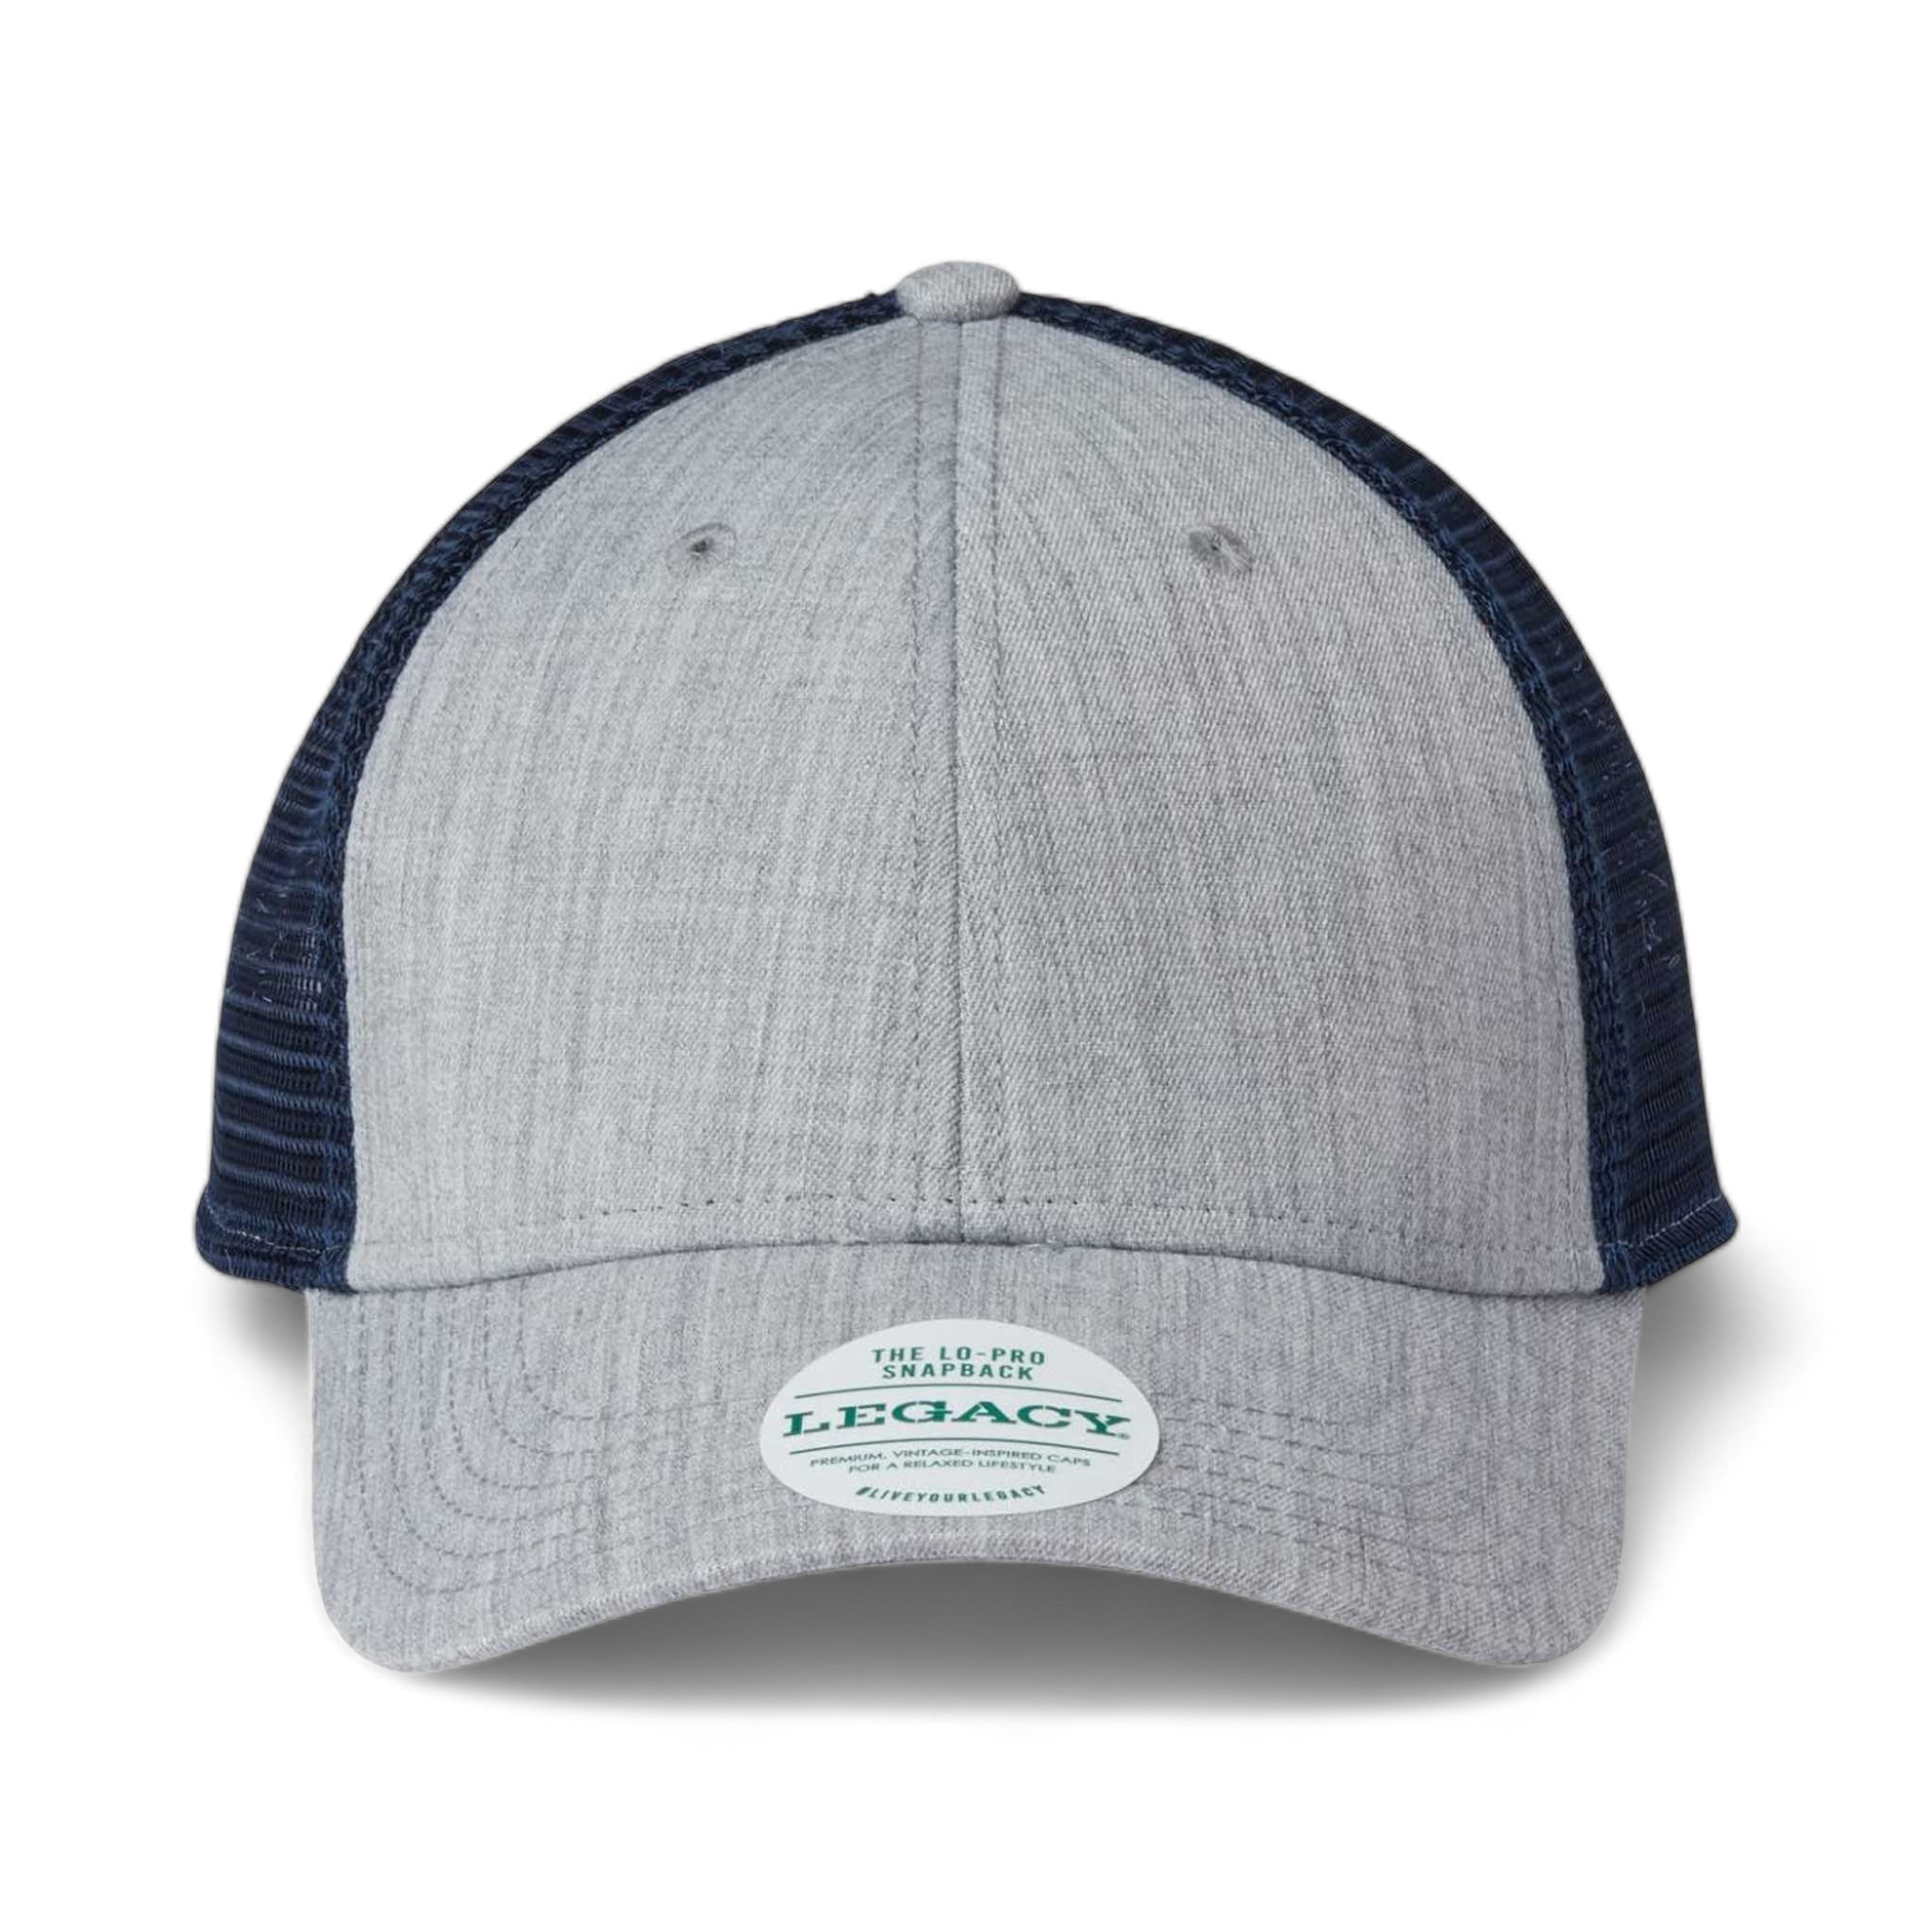 Front view of LEGACY LPS custom hat in heather grey and navy